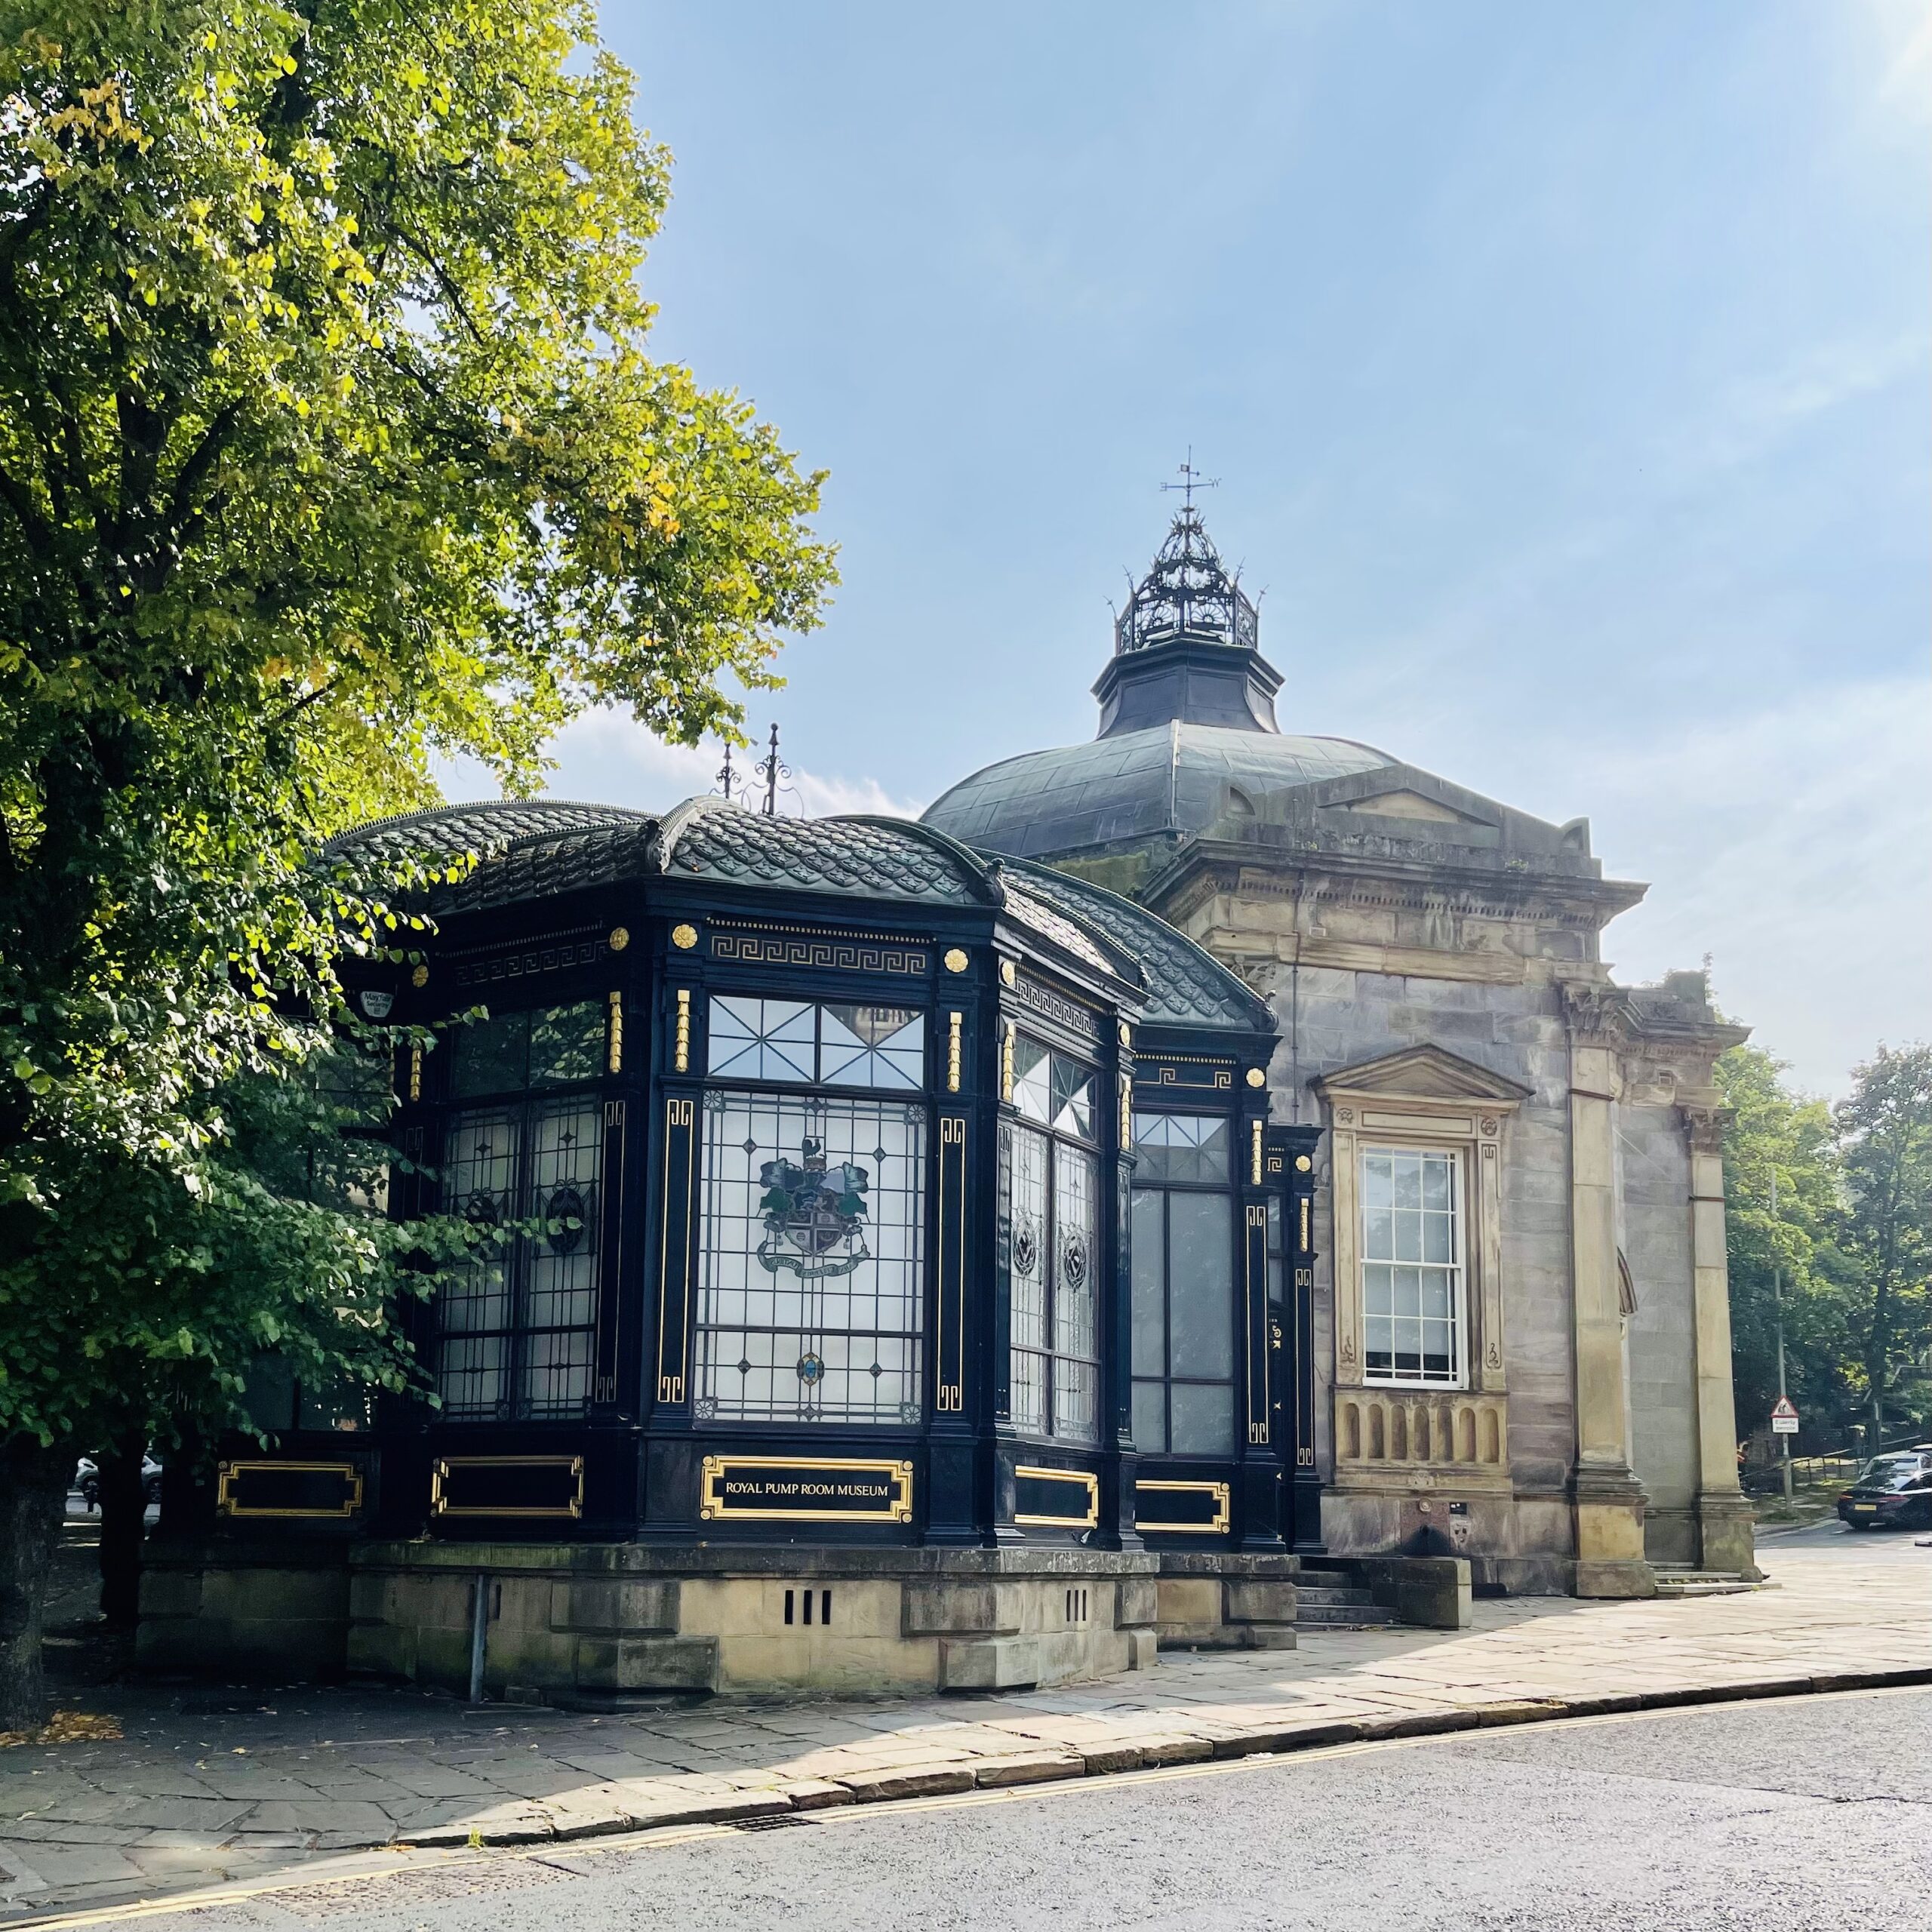 The Harrogate pump rooms museum in the sunshine